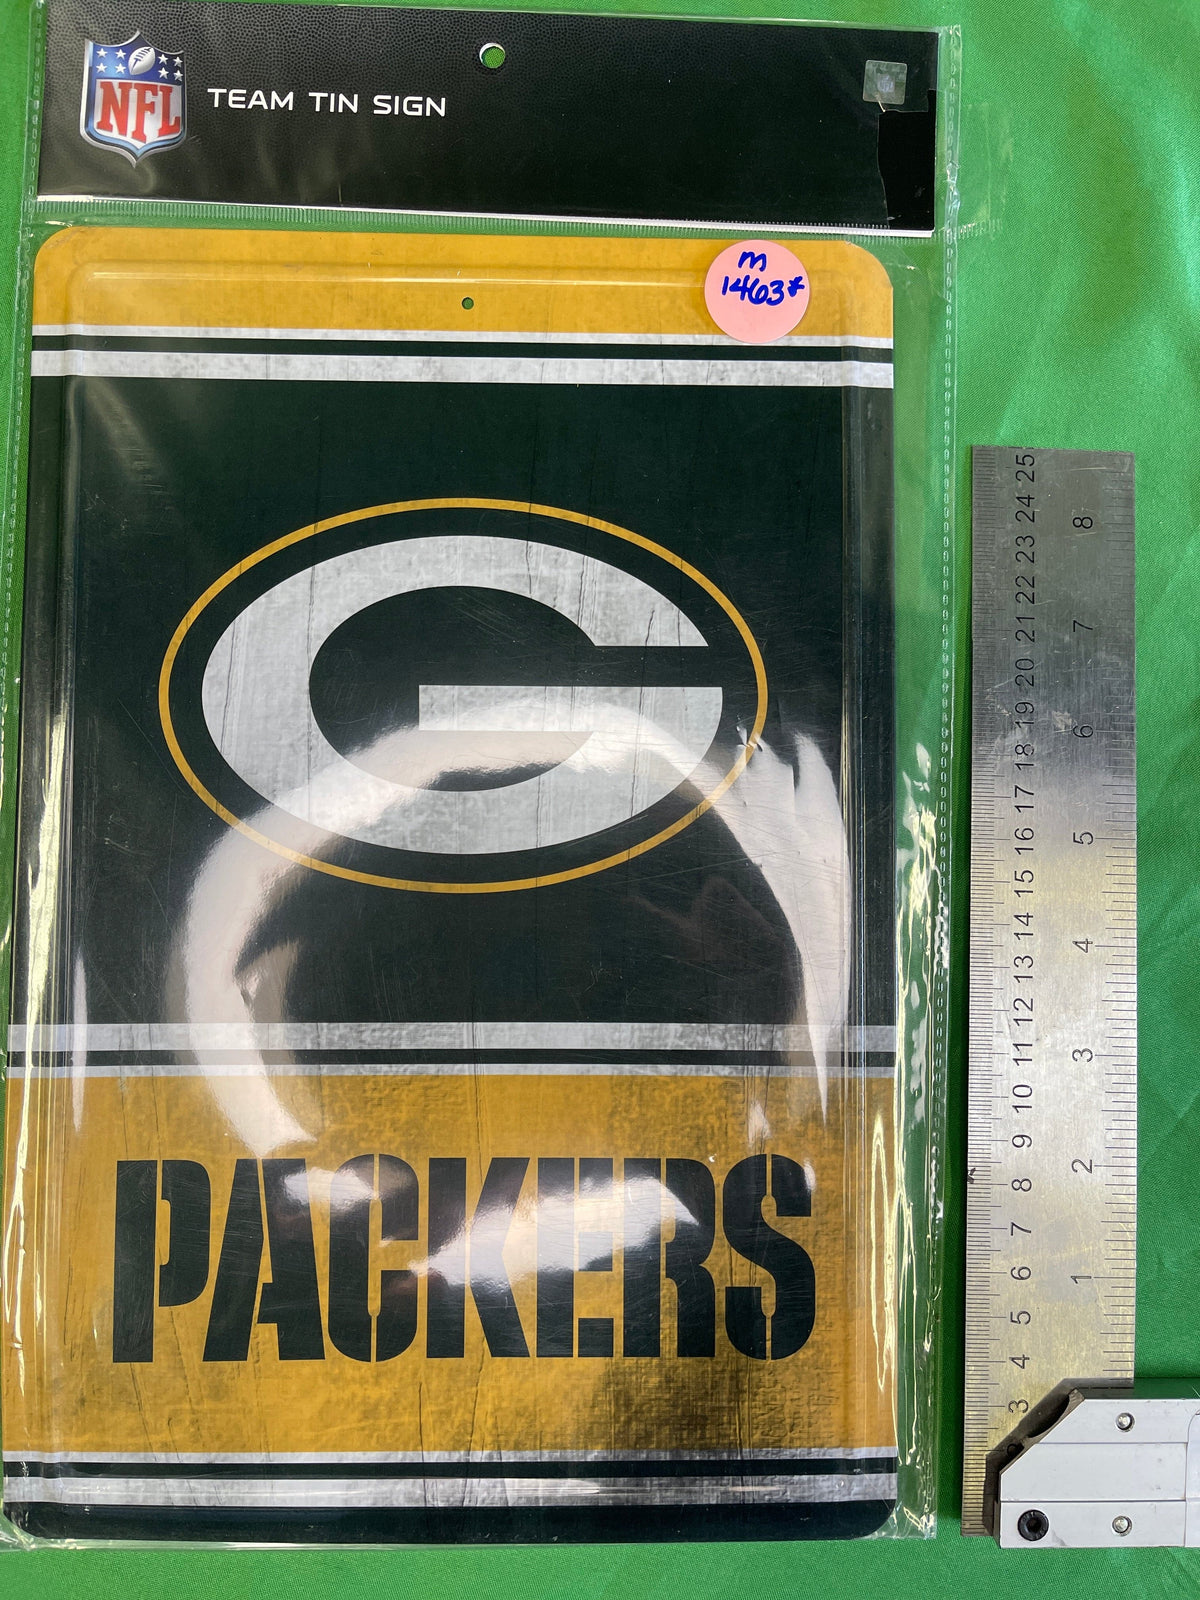 NFL Green Bay Packers 8" x 12" Team Tin Sign NWT